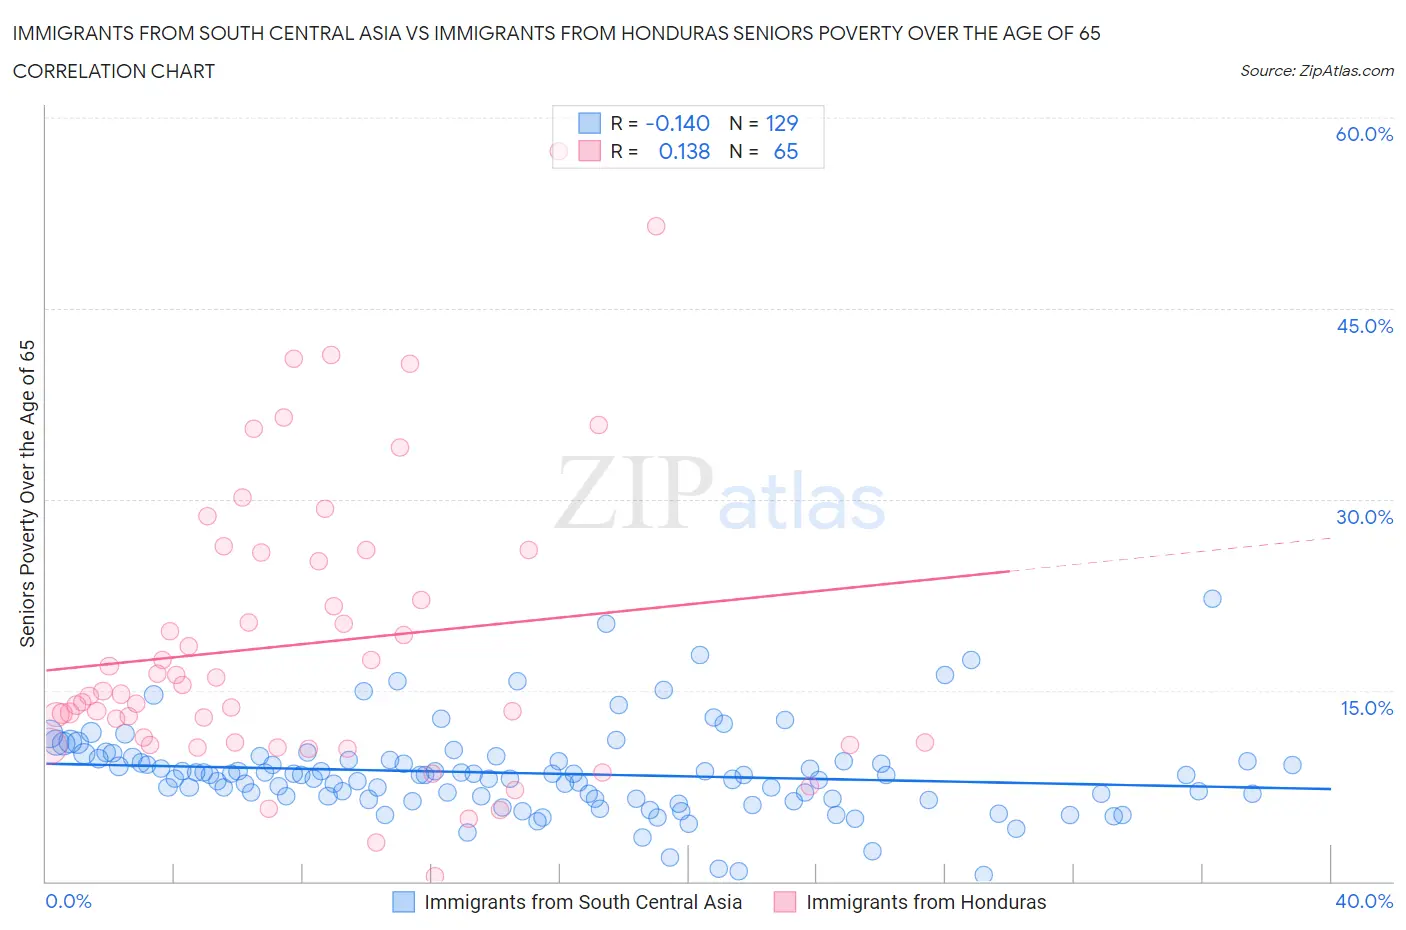 Immigrants from South Central Asia vs Immigrants from Honduras Seniors Poverty Over the Age of 65